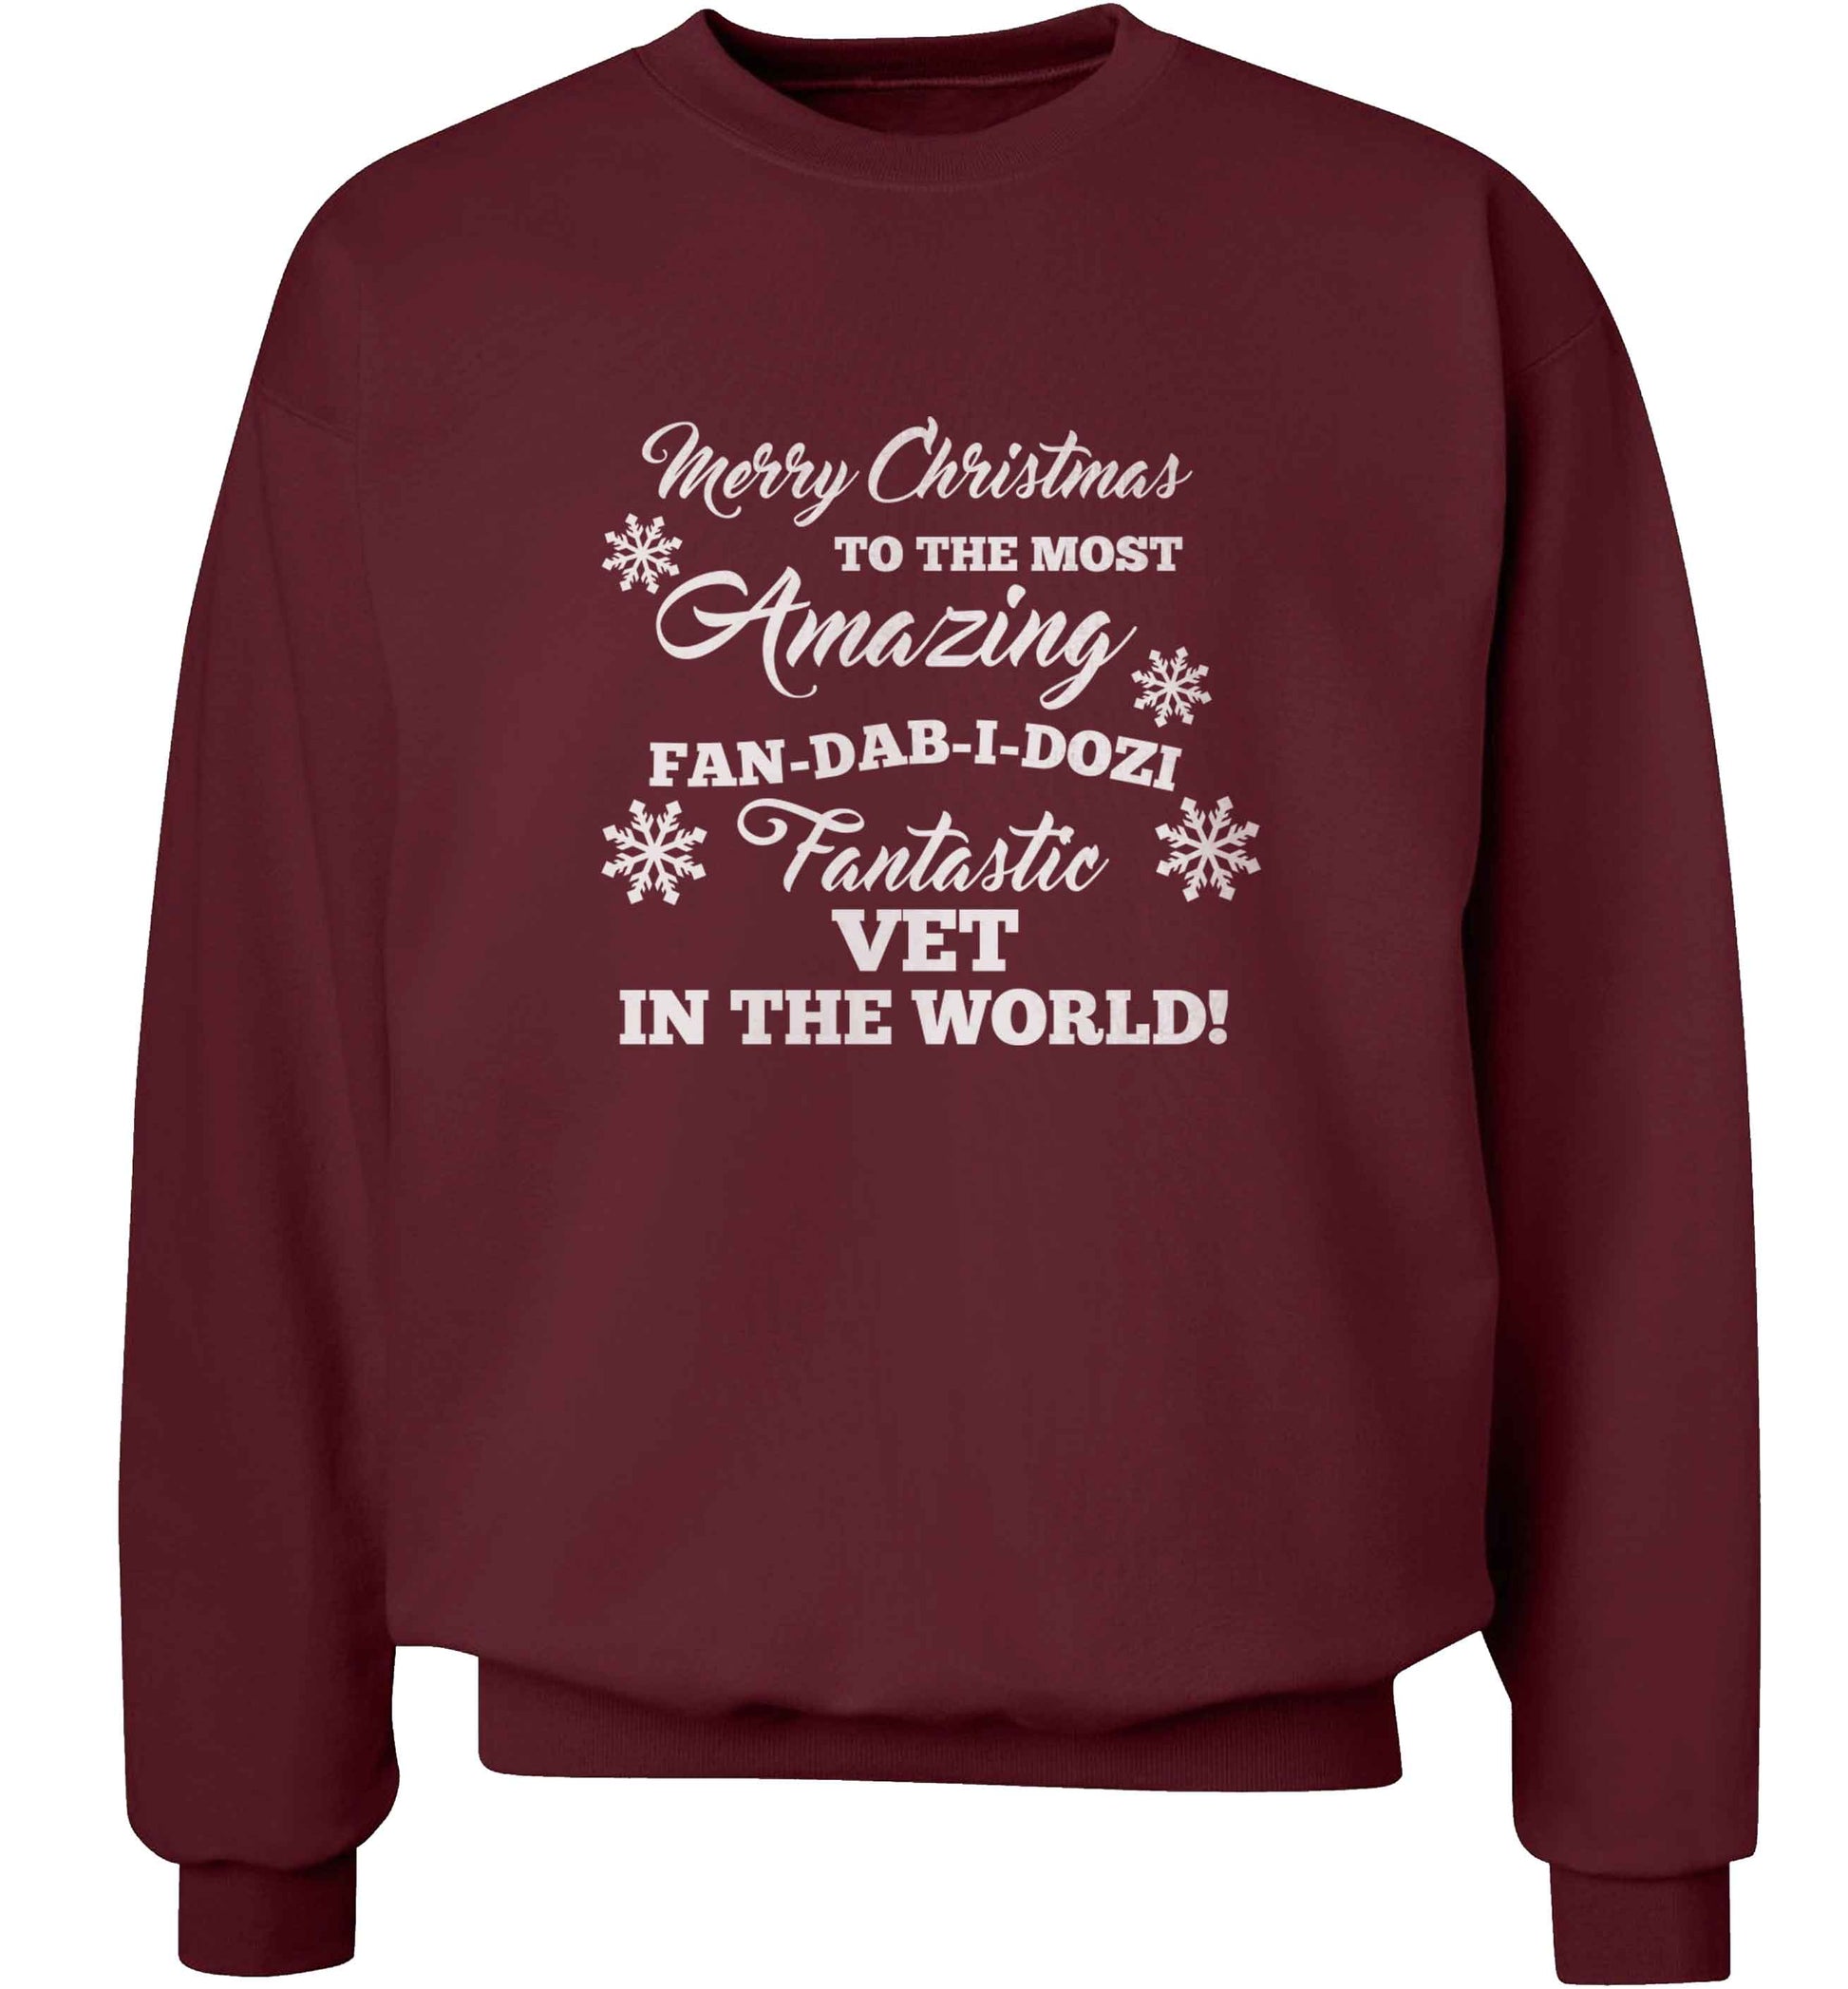 Merry Christmas to the most amazing vet in the world! adult's unisex maroon sweater 2XL